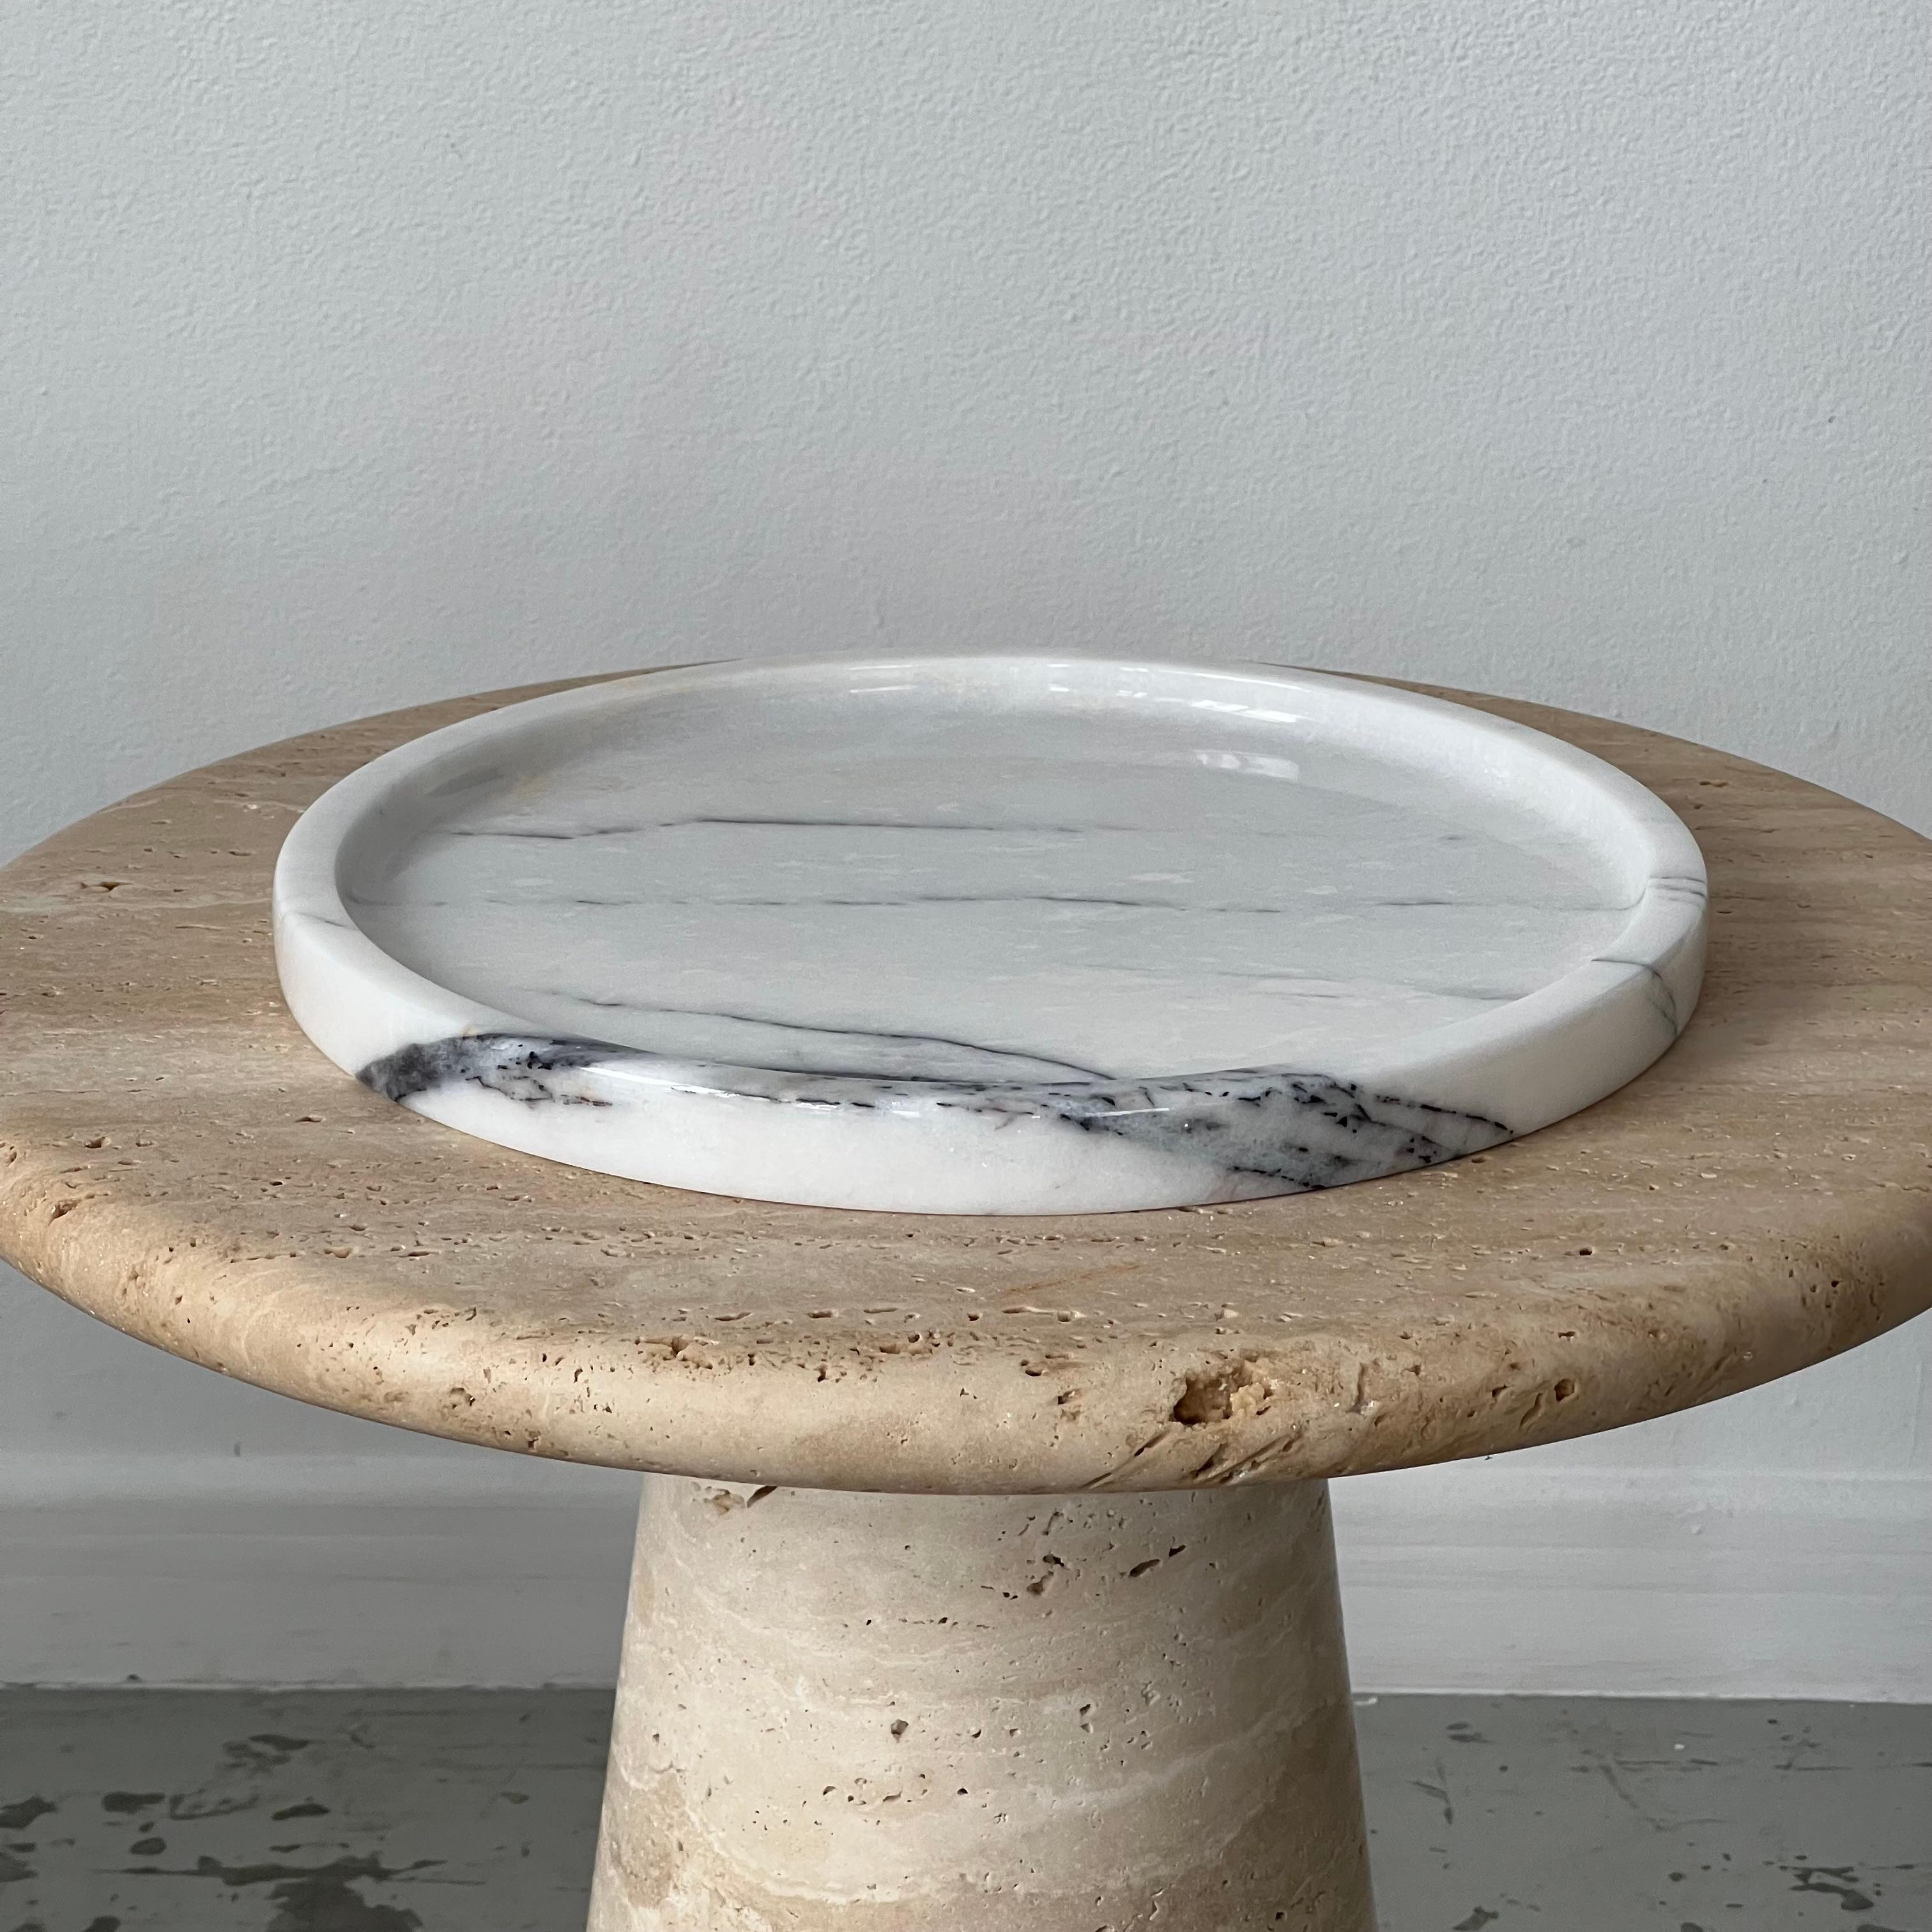 Circular dish in white marble with light, diffuse grey veins. 
Very good original condition.